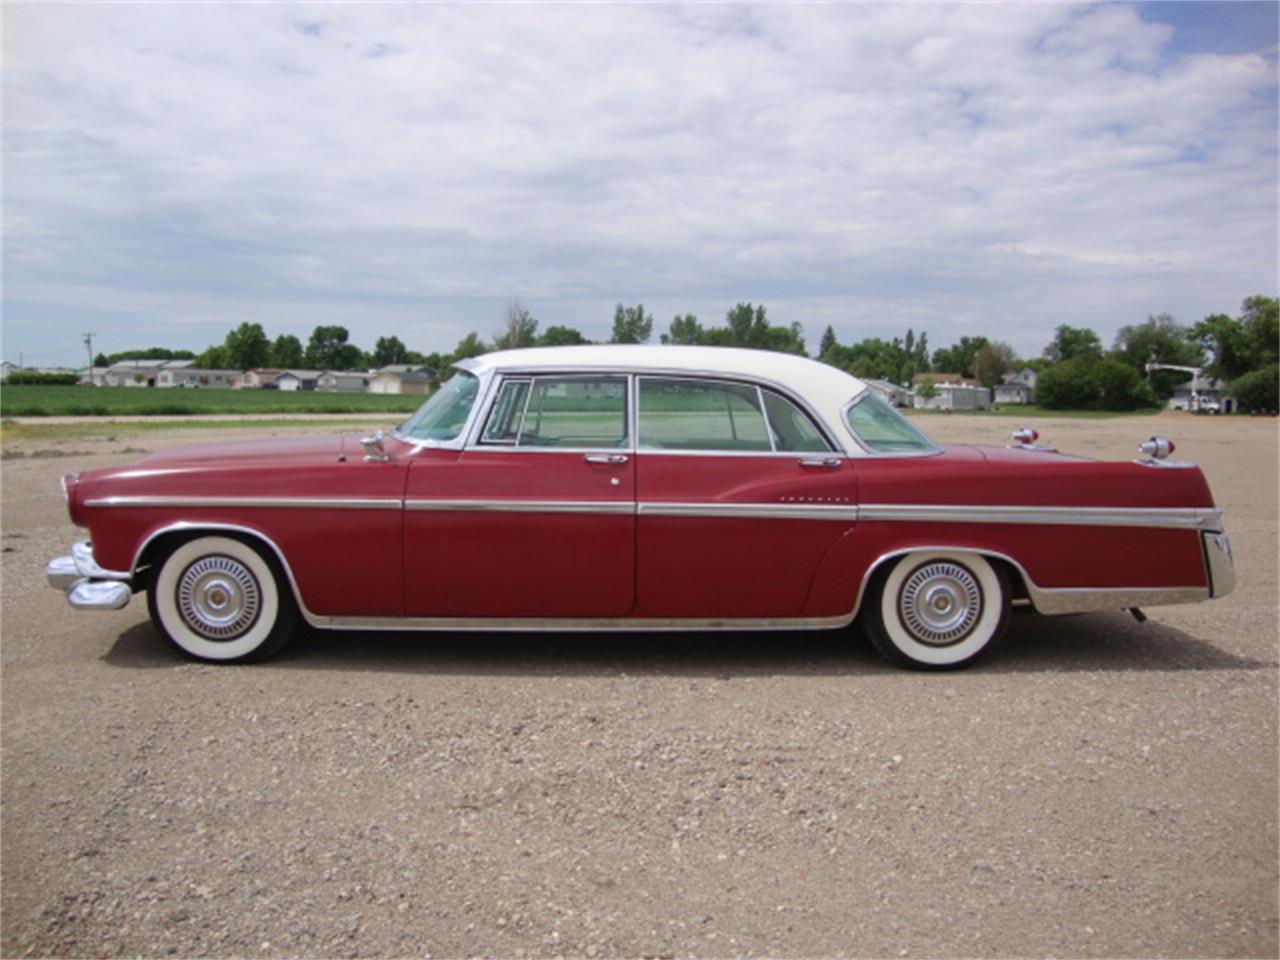 1956 Chrysler Imperial South Hampton for sale in Milbank, SD.